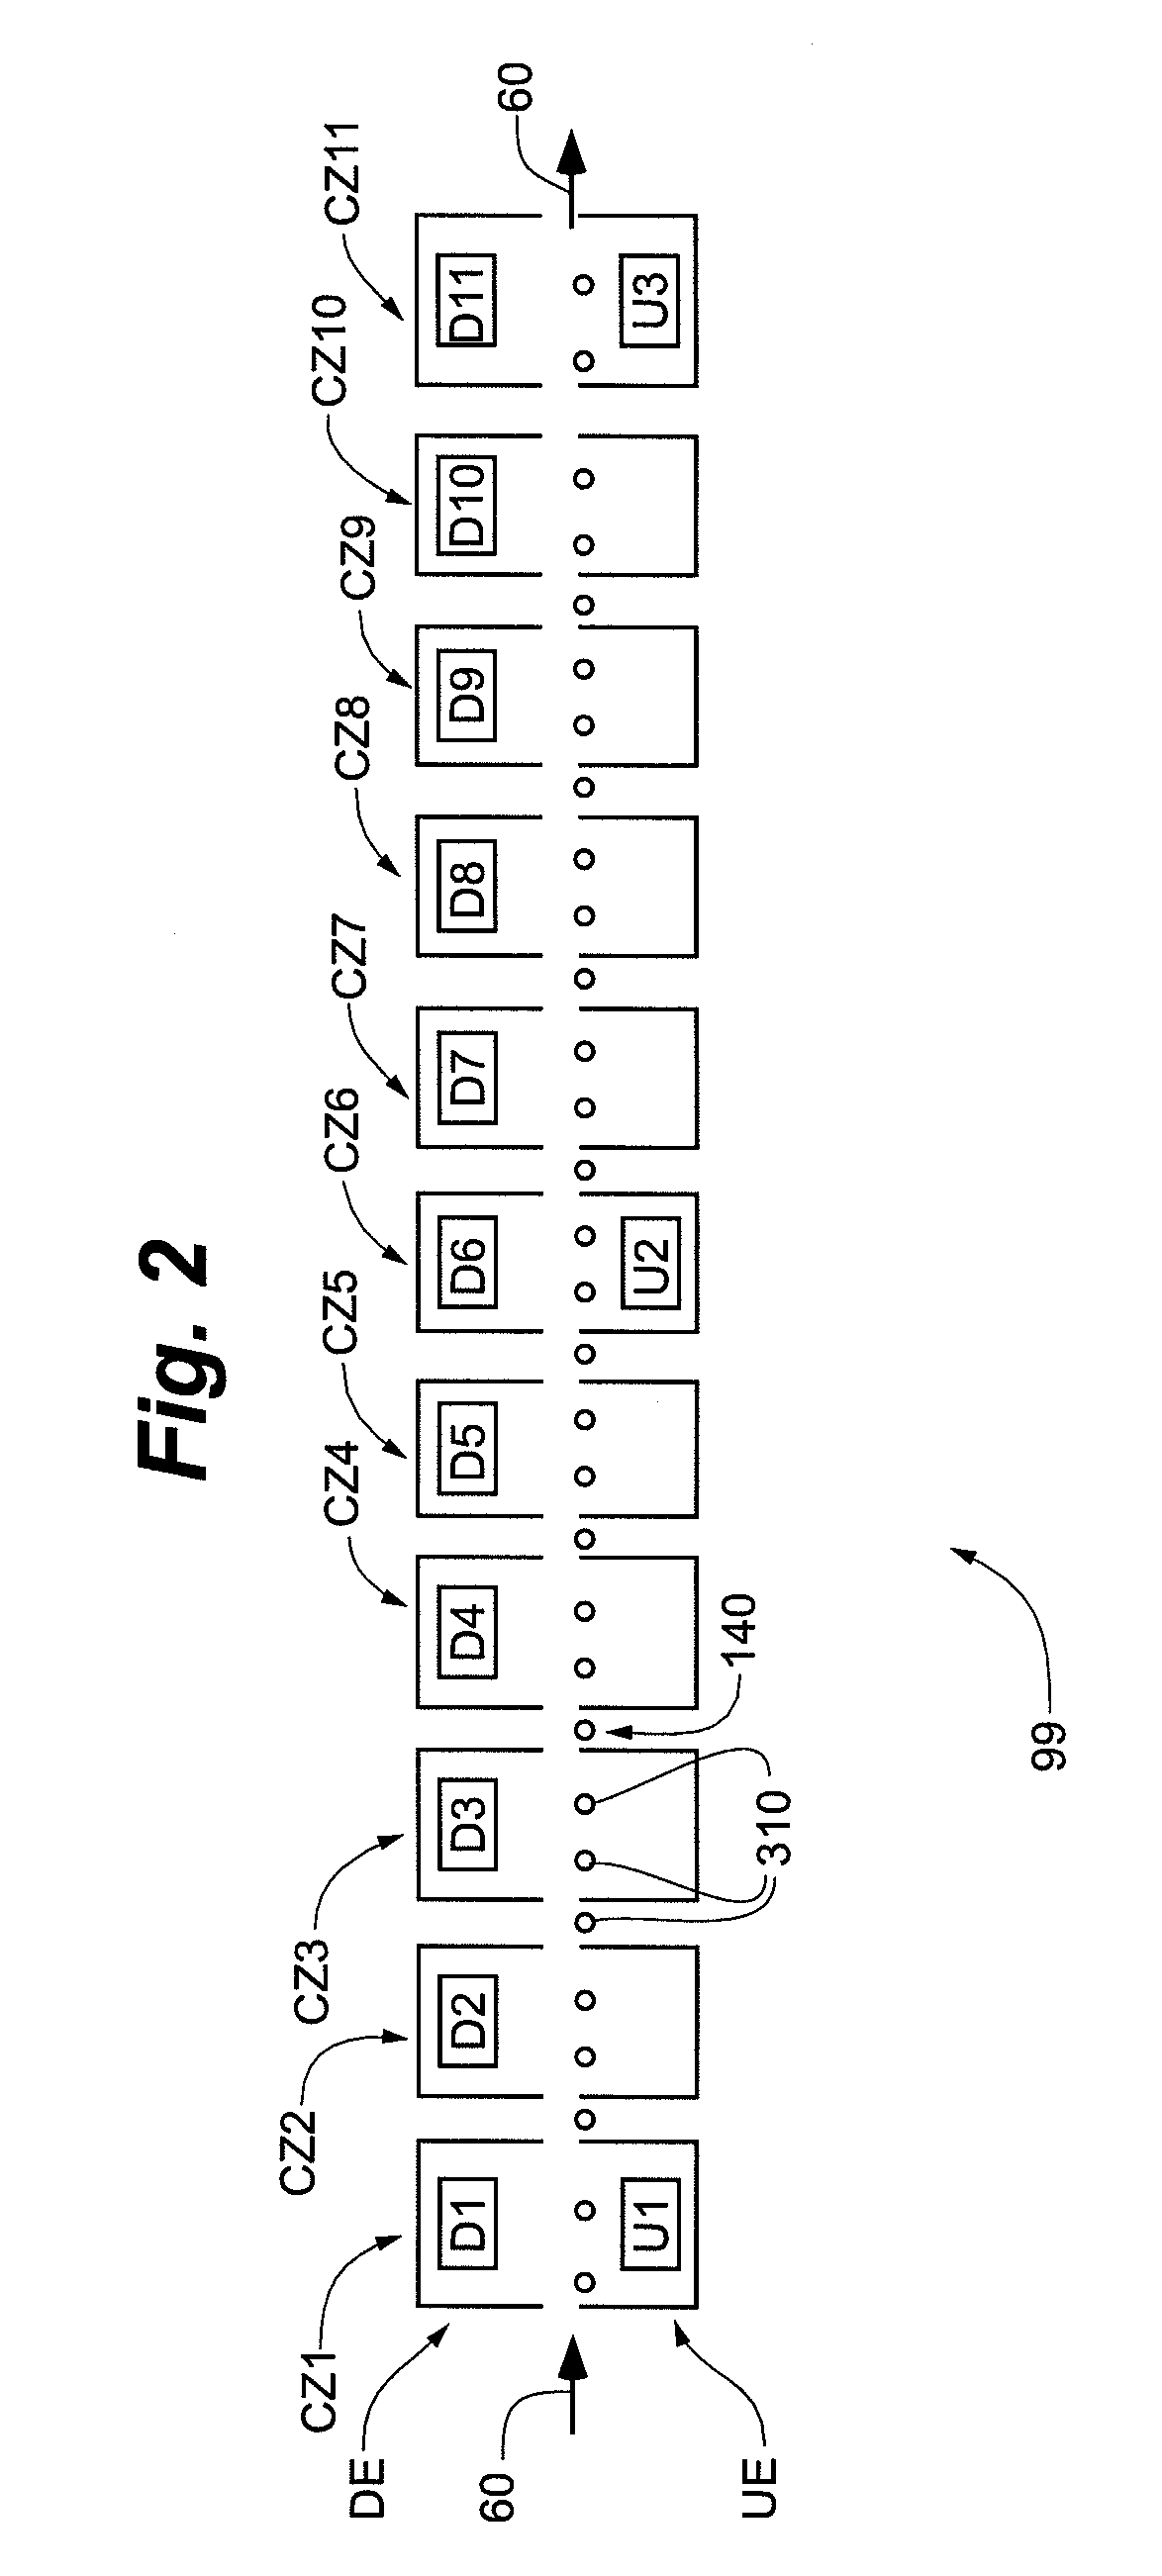 Methods and equipment for depositing coatings having sequenced structures